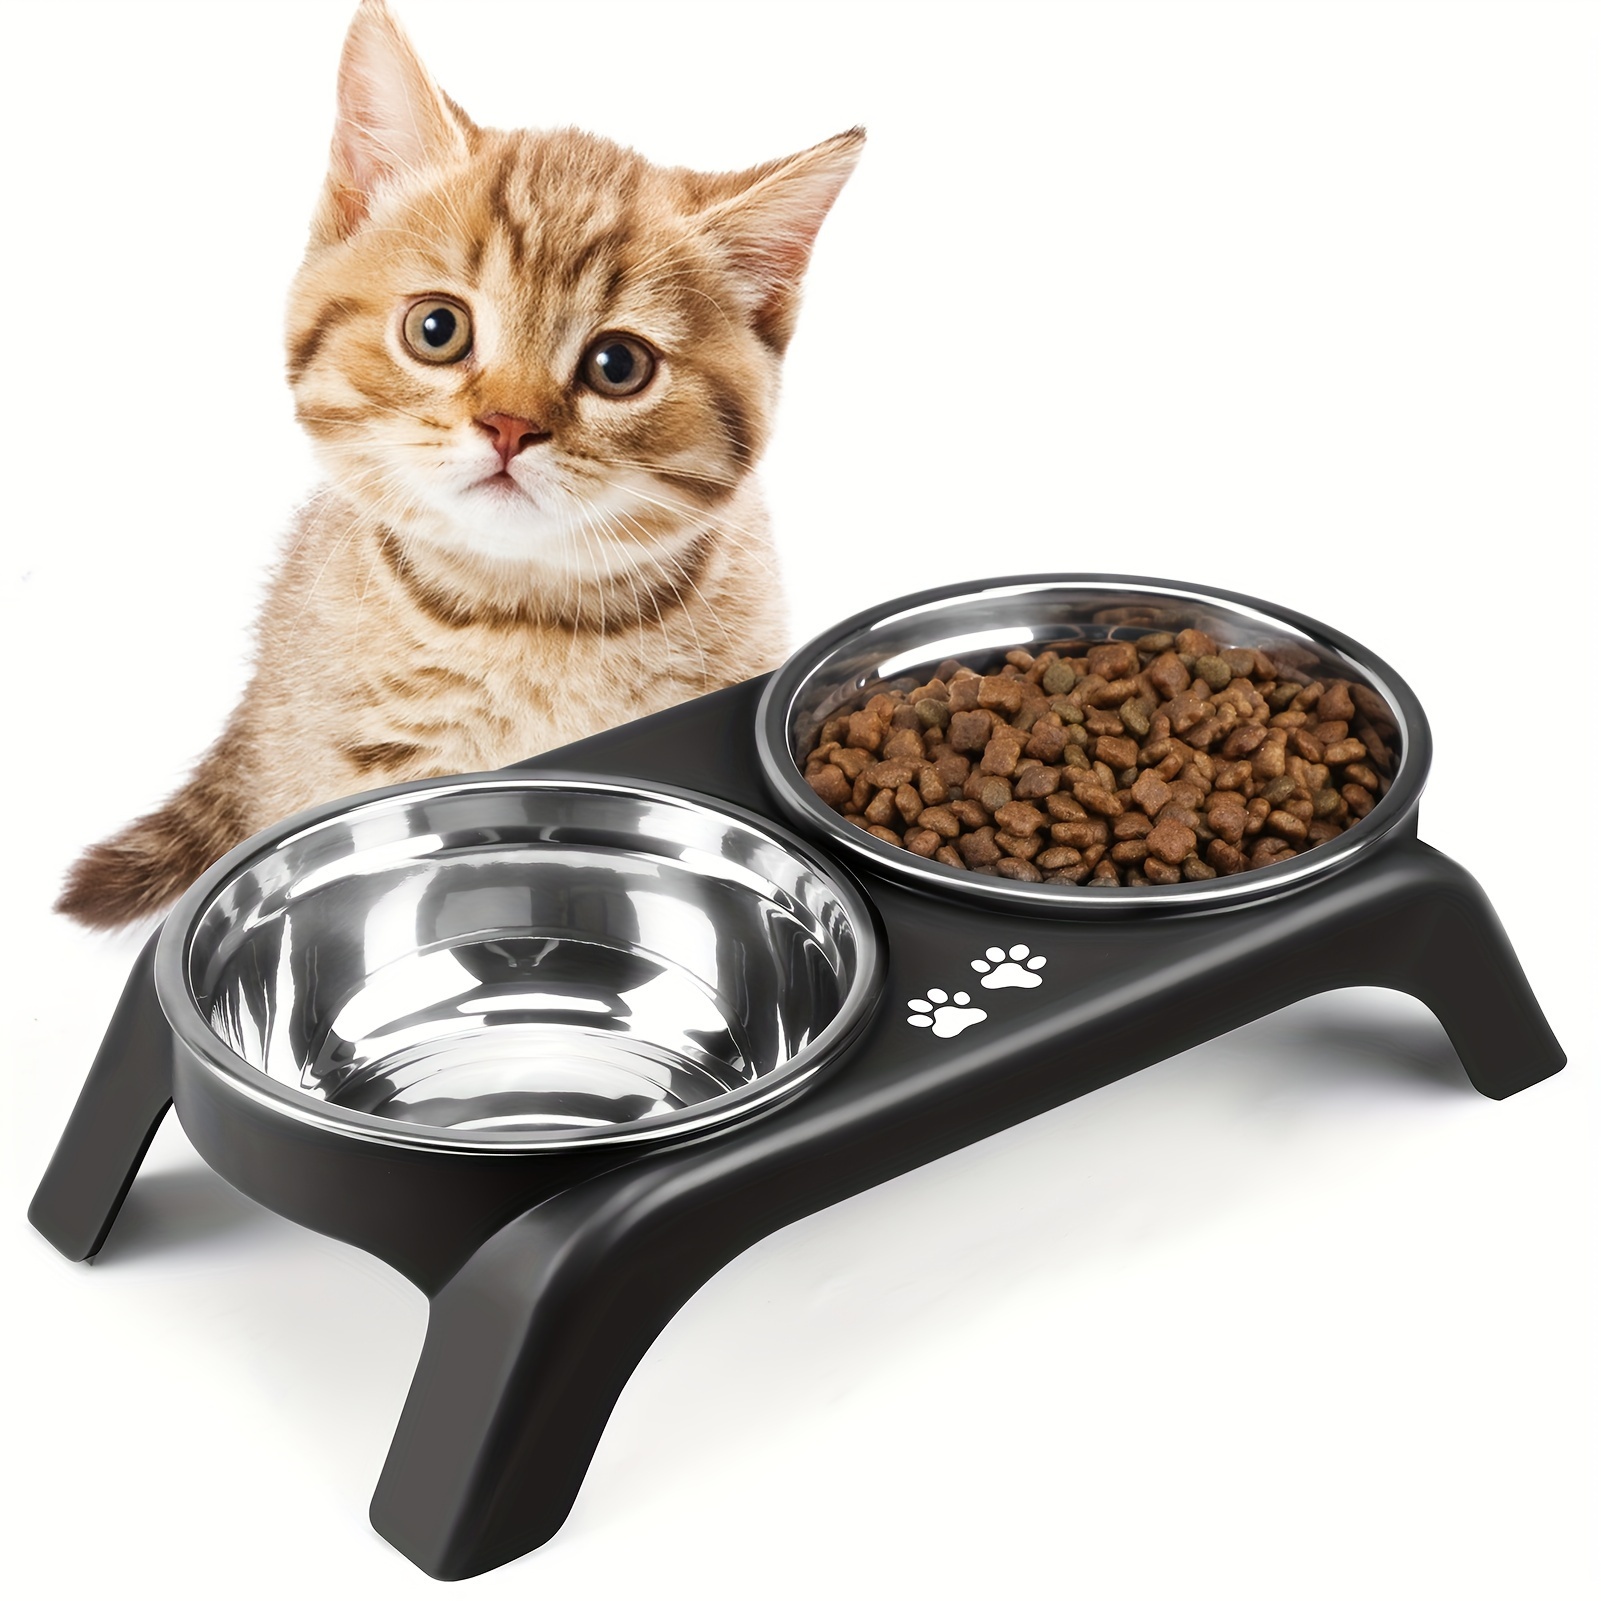 

chic" Elevated Stainless Steel Cat Bowls With Non-slip Feet - Anti-vomiting, Easy Clean Design For Indoor Cats & Small Dogs